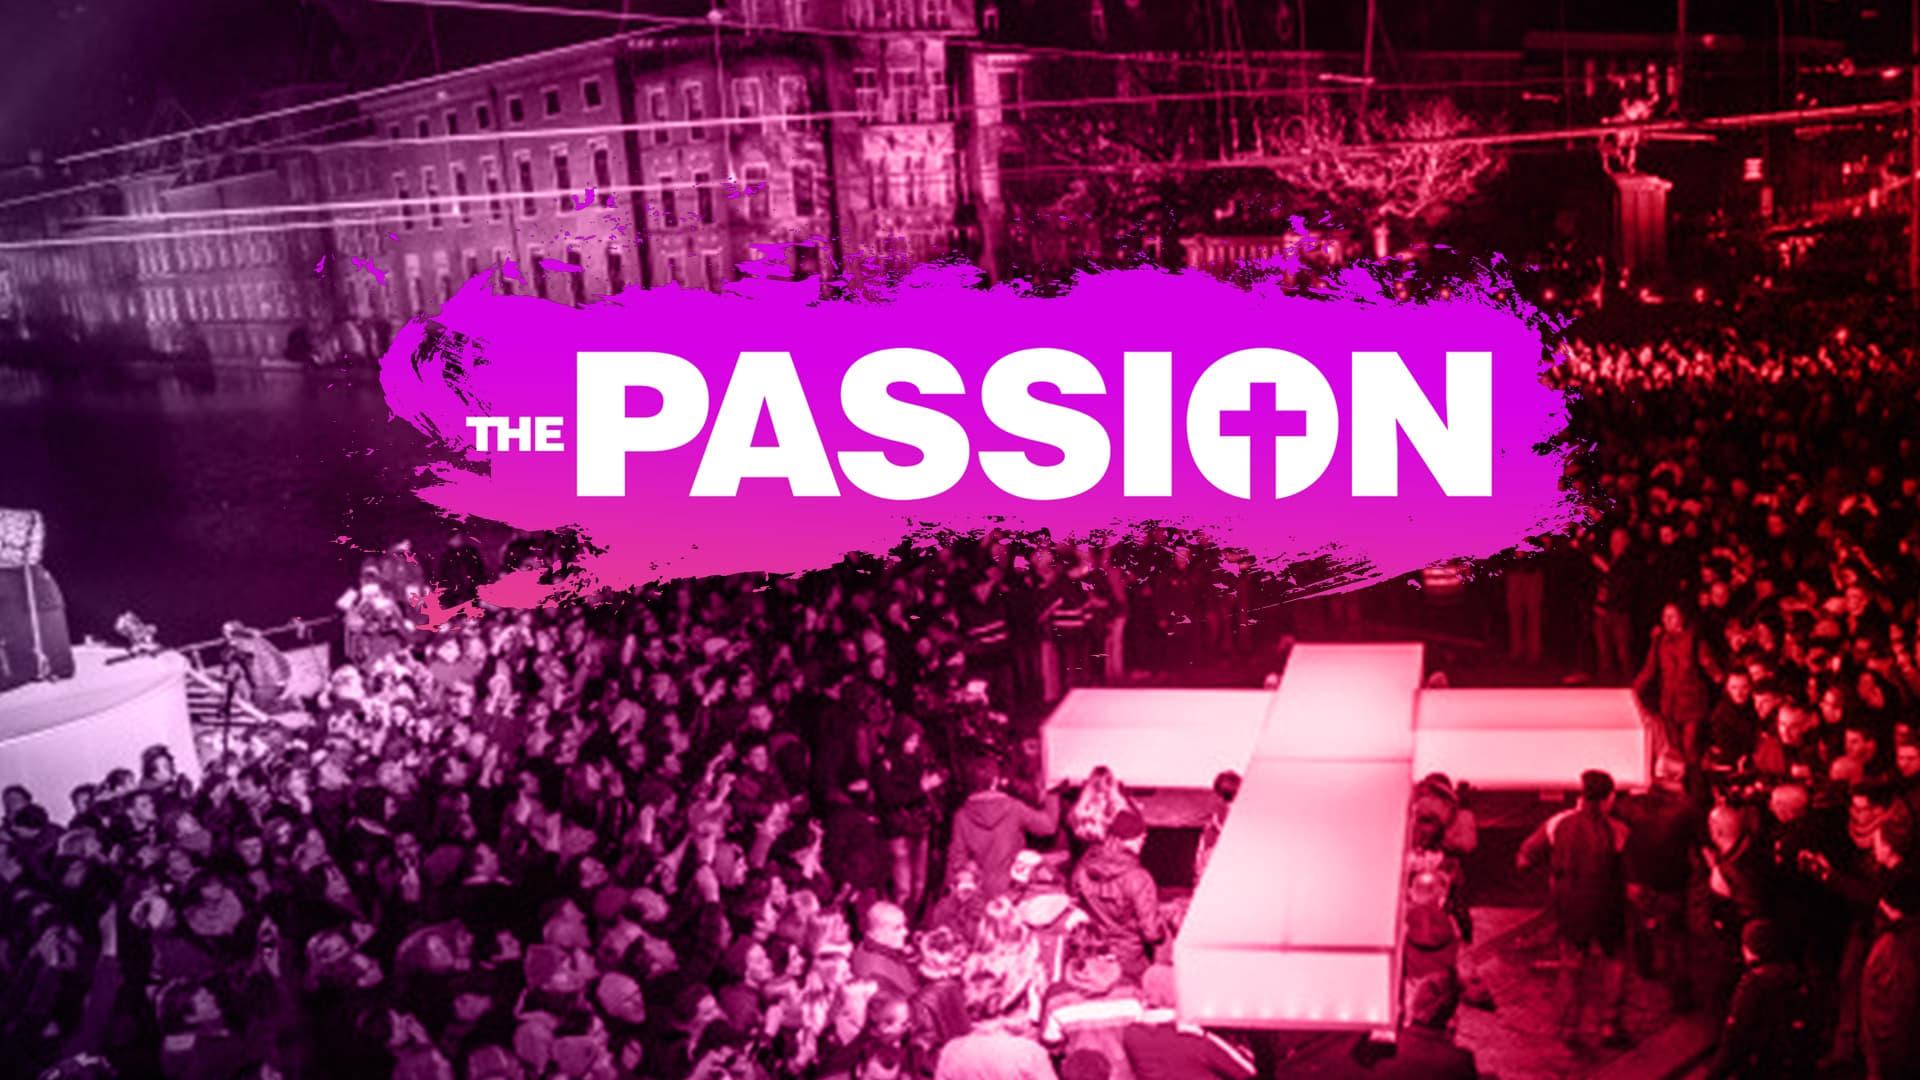 The Passion Nederland backdrop